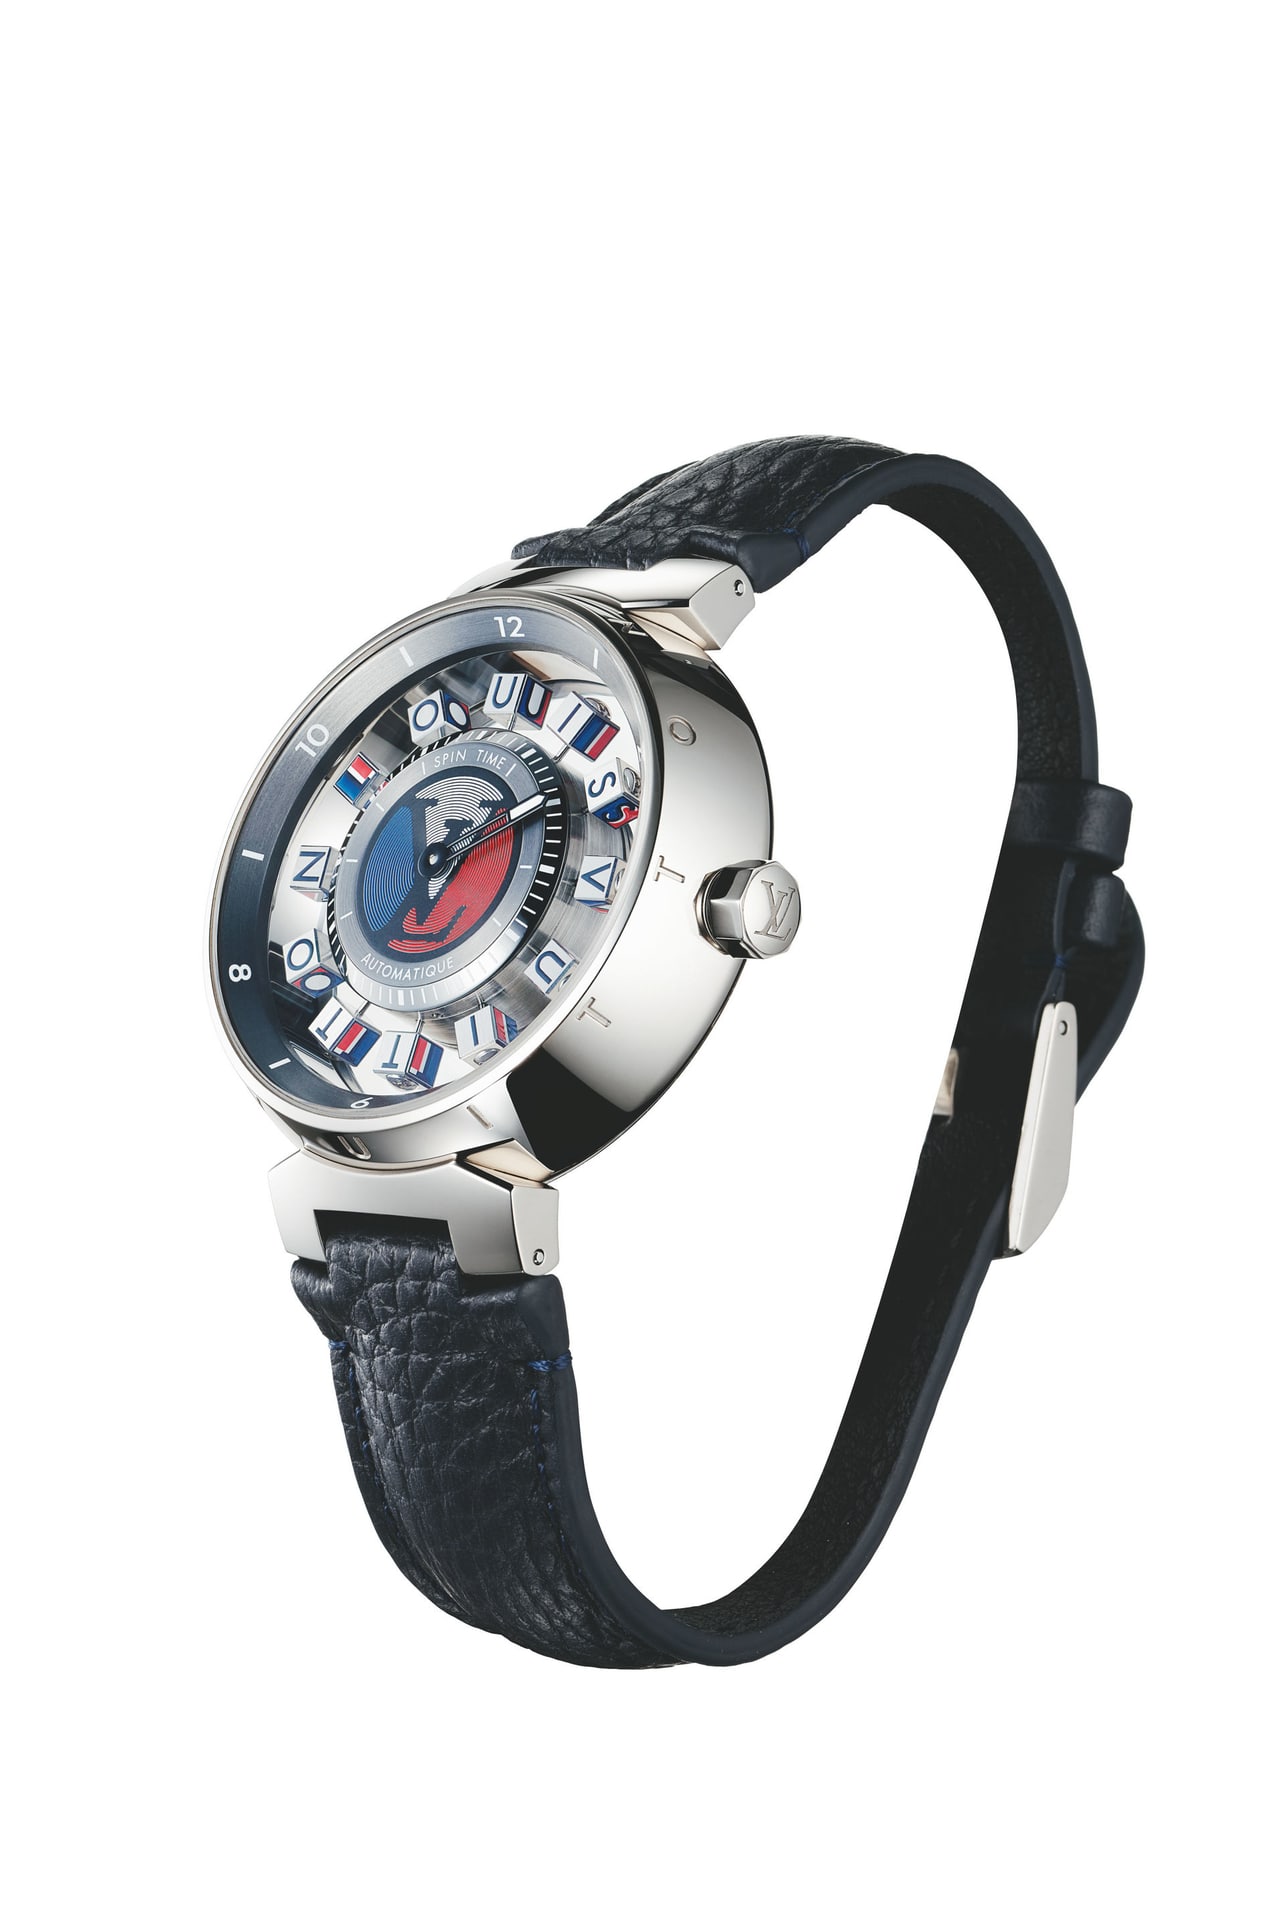 Louis Vuitton Tambour Spin Time Air Watch